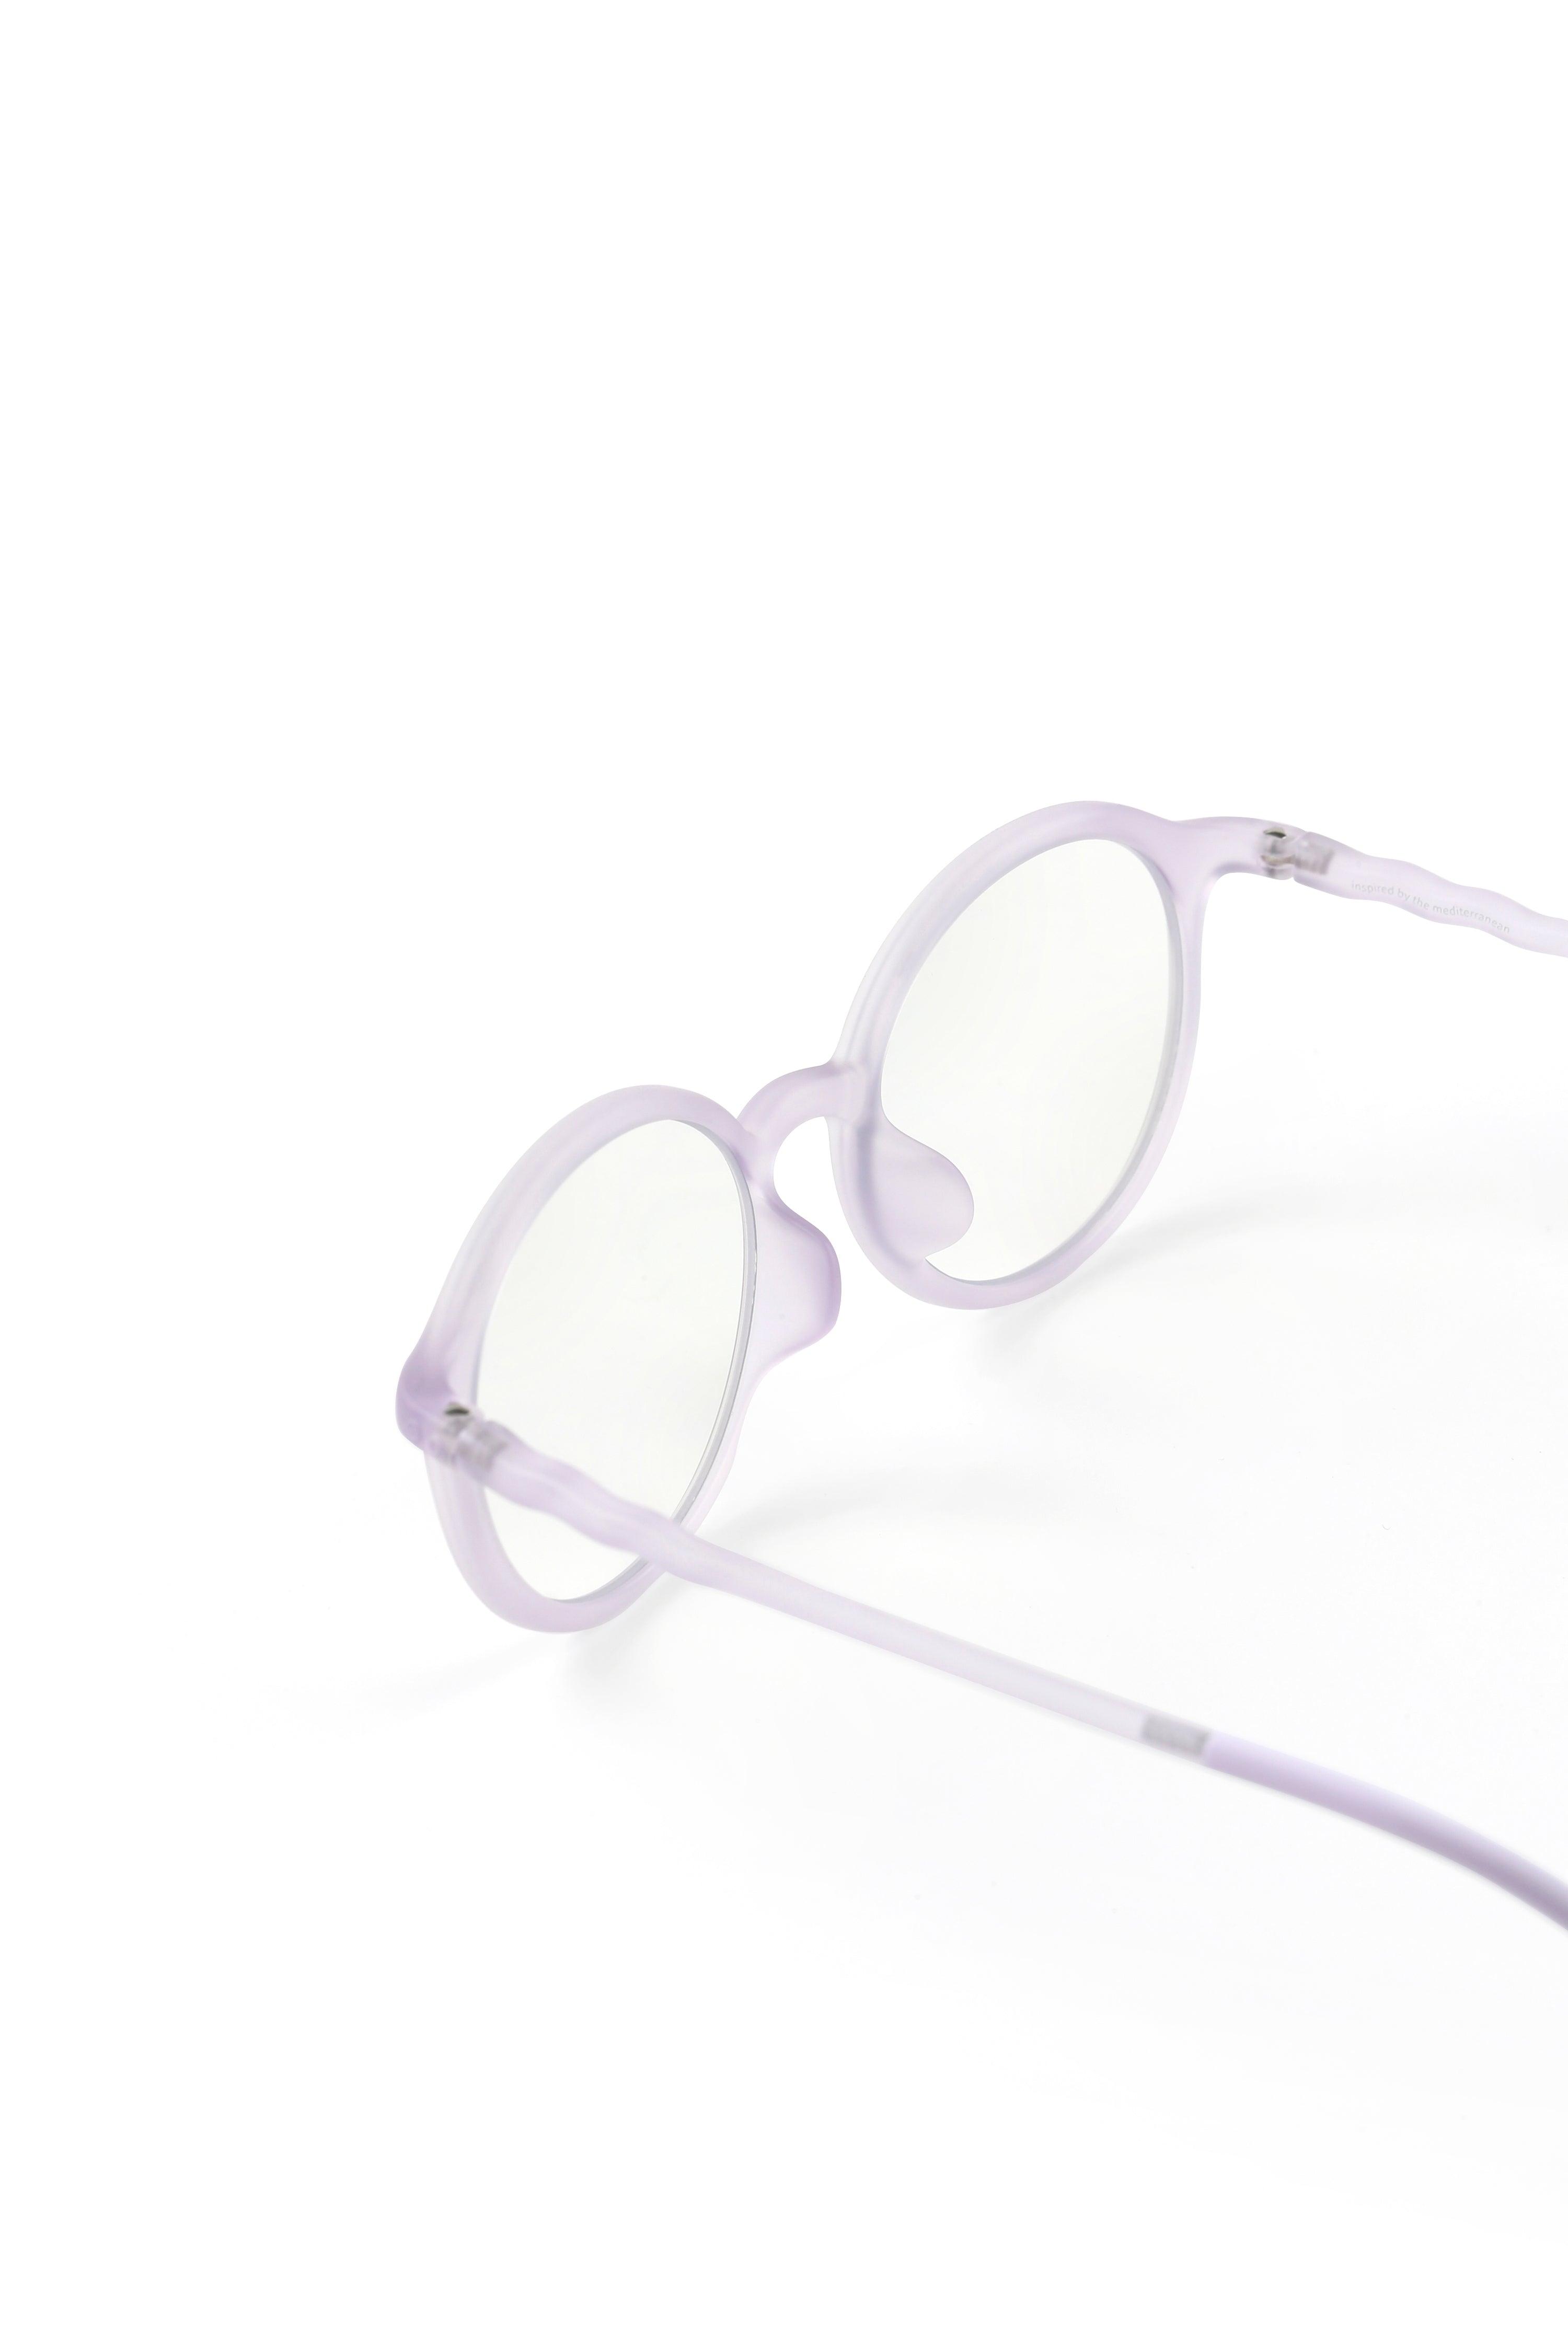 Olivio & Co Lilac Oval - Adult (12+ years old)